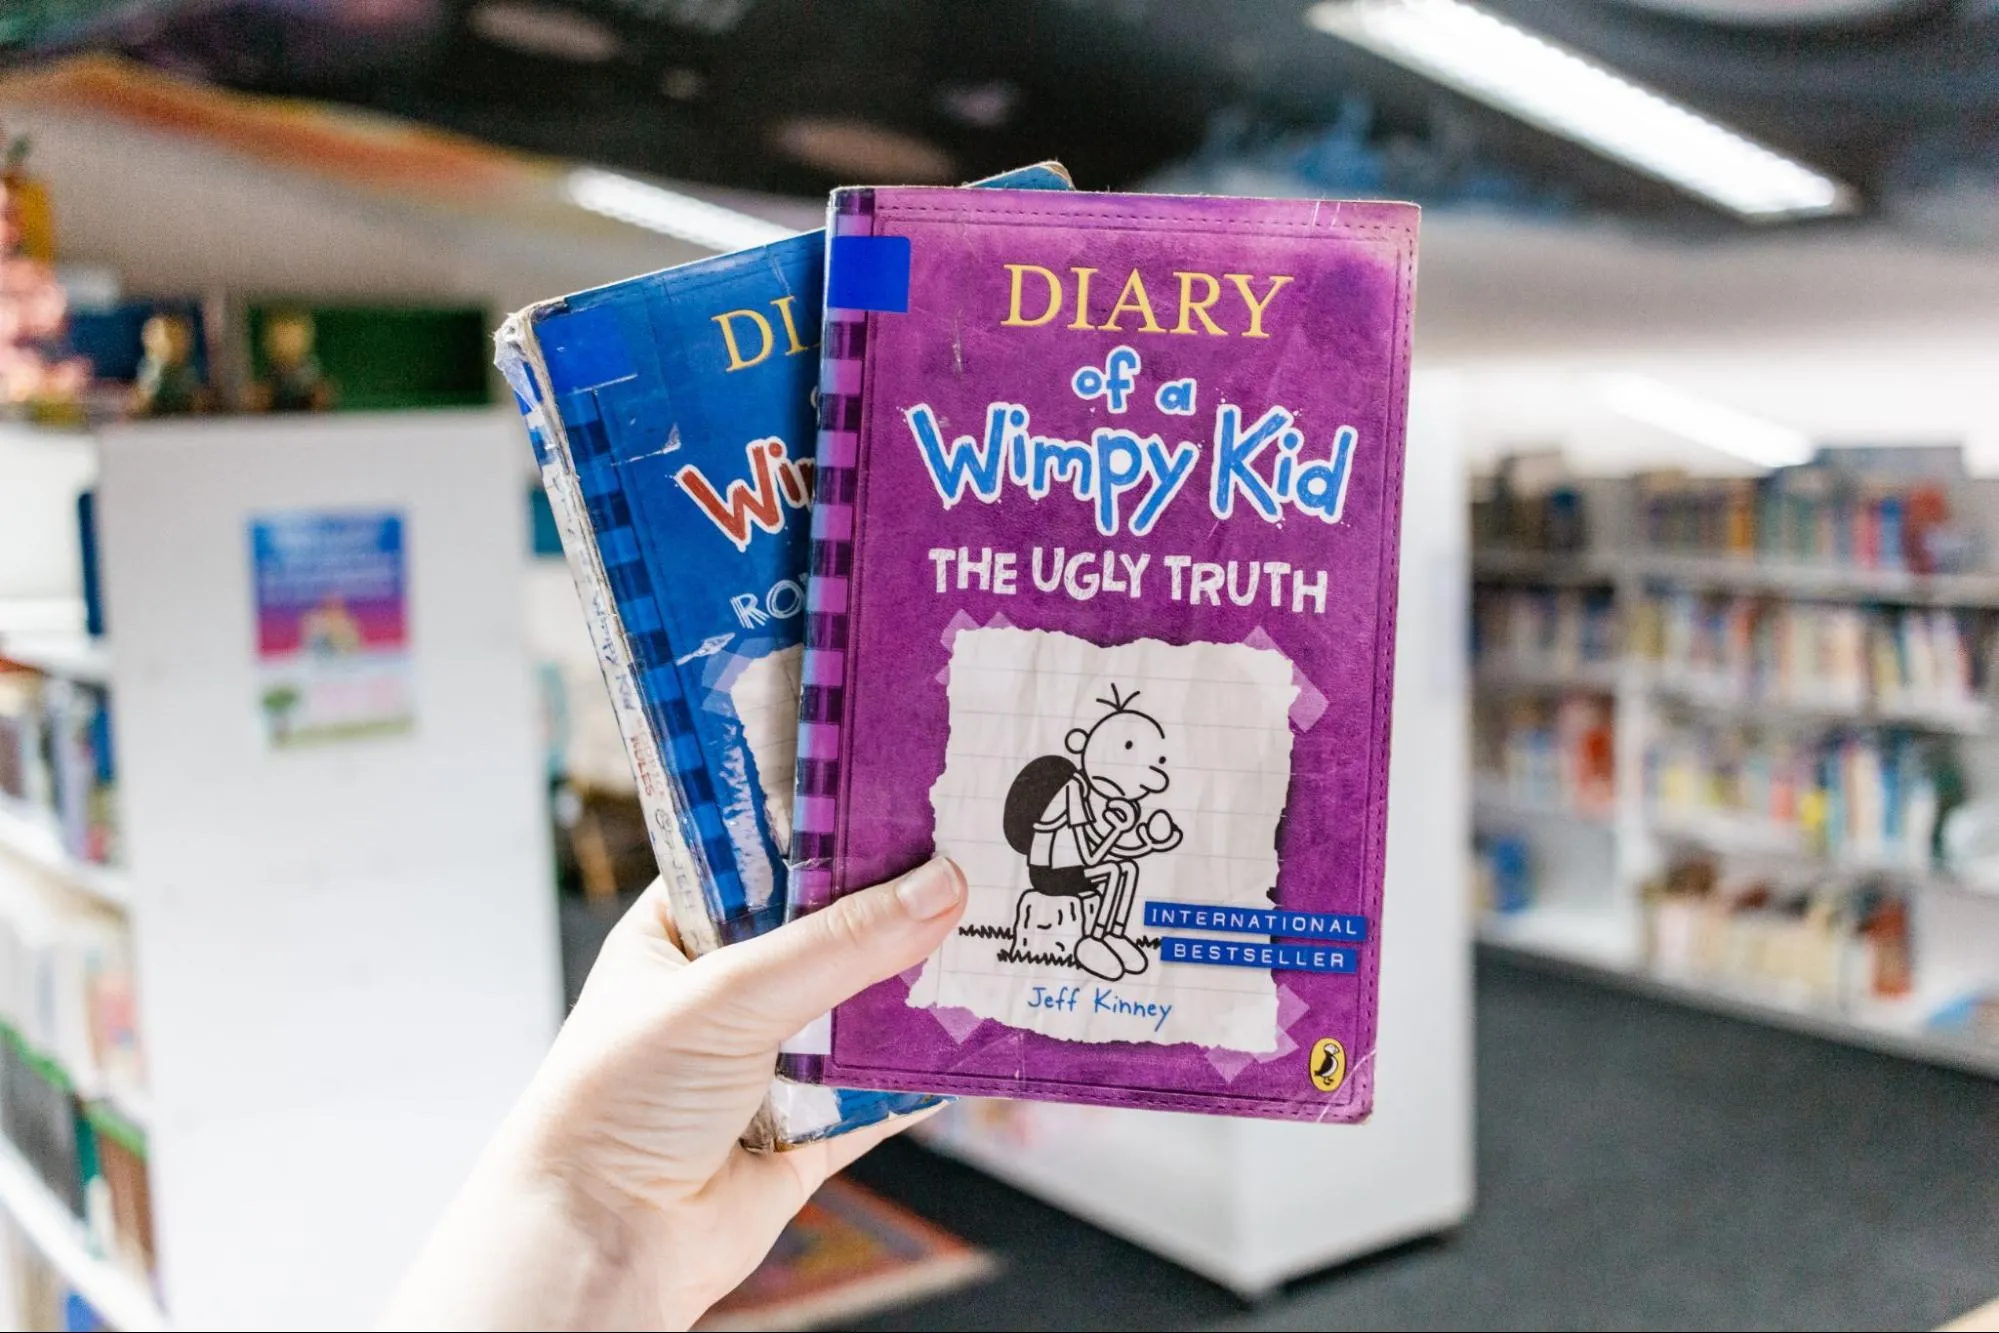 What are some books for kids who like diary of a wimpy kid?